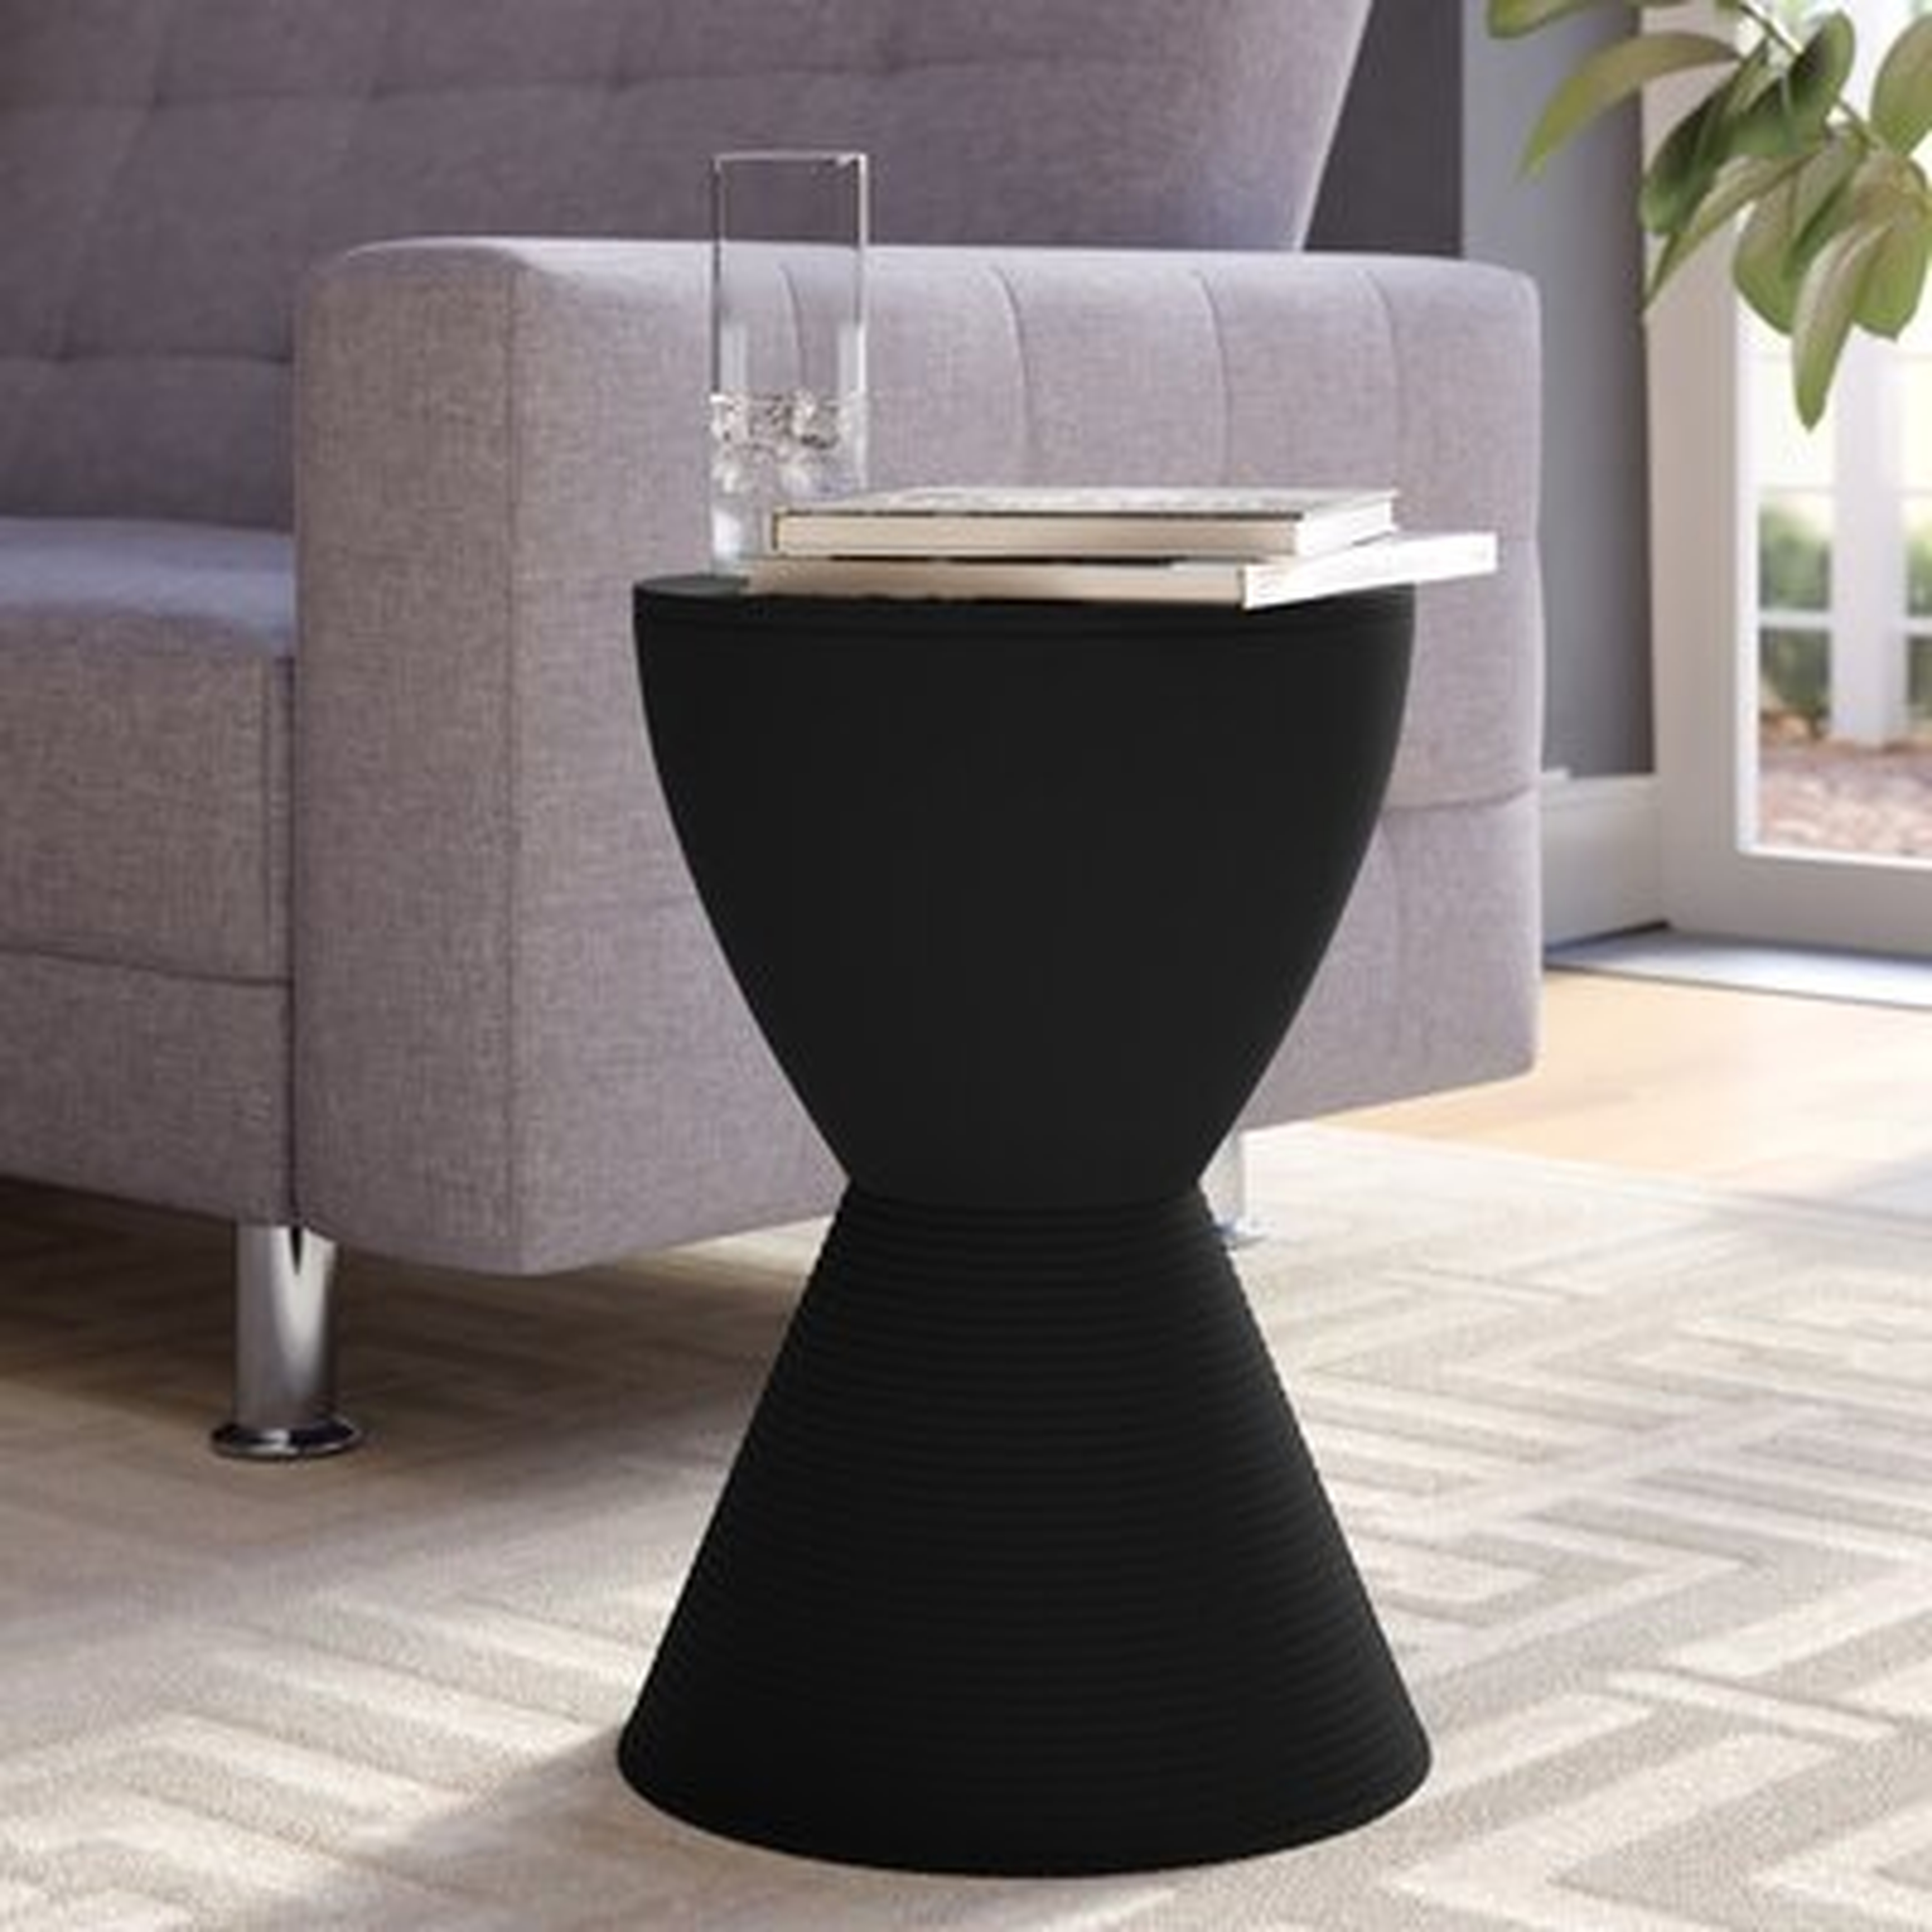 Osceola Tray Top Drum End Table with Storage, Black - Wayfair